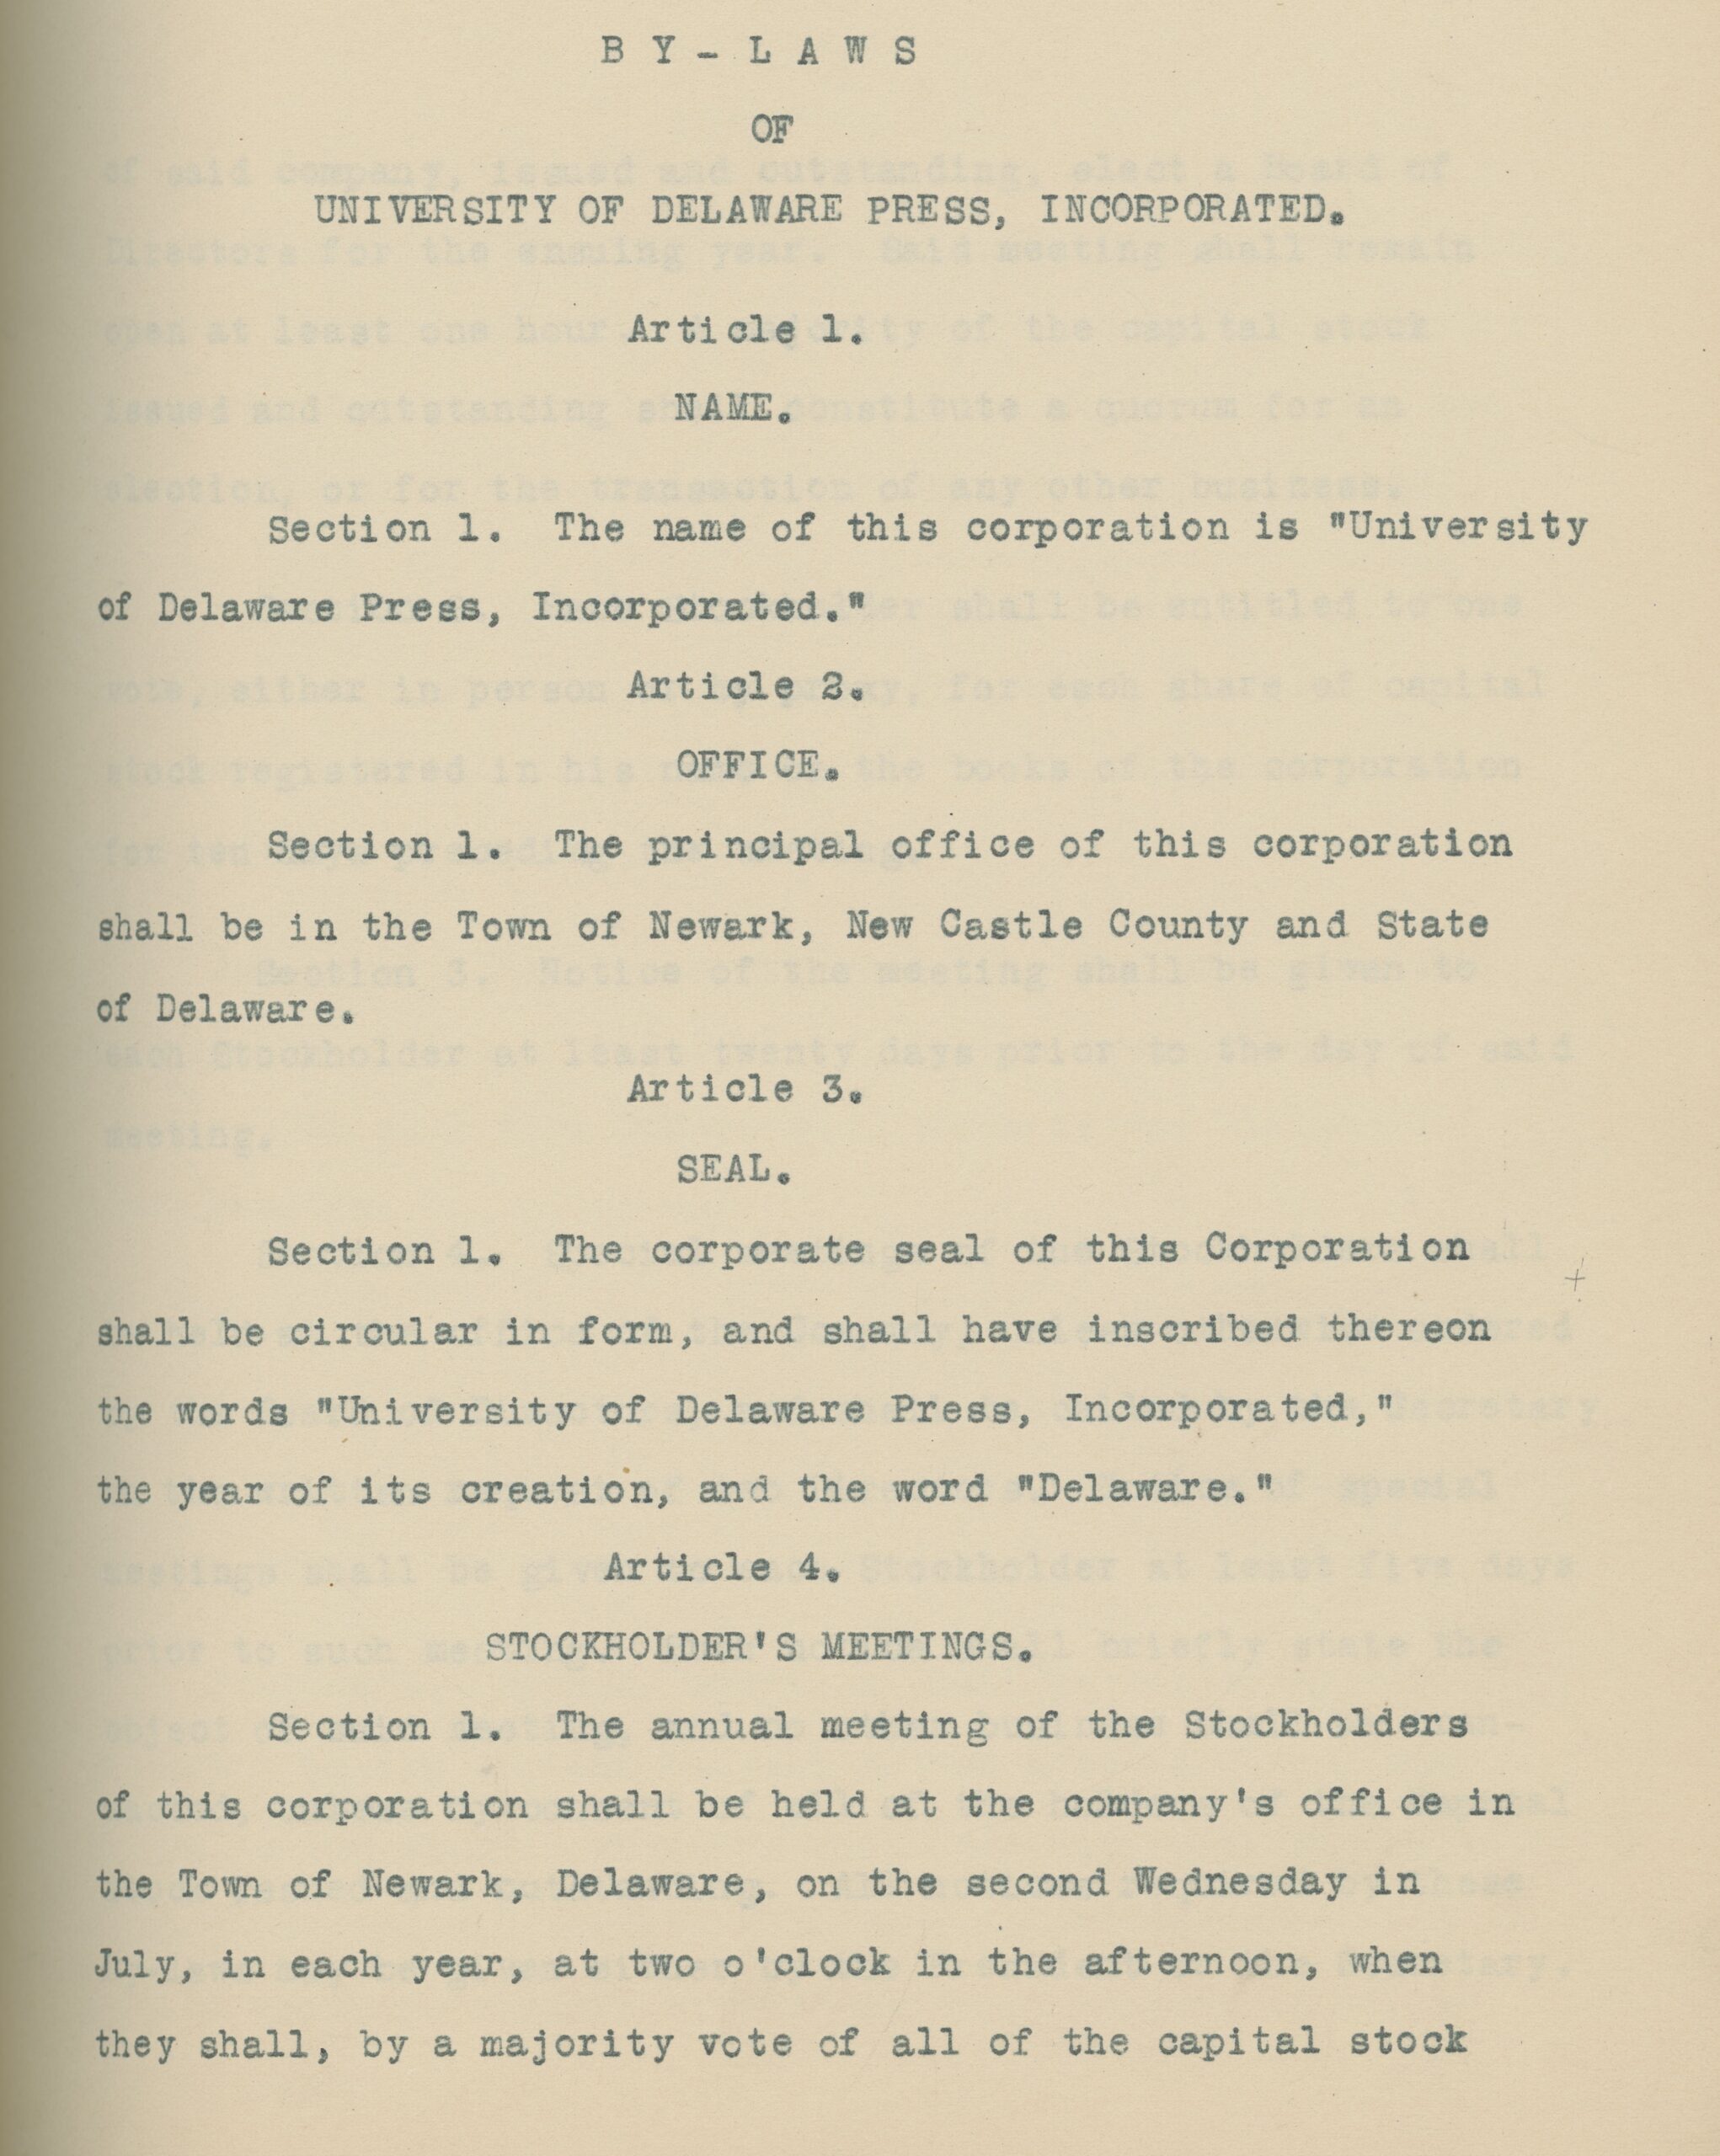 University of Delaware Press 1922 By-Laws